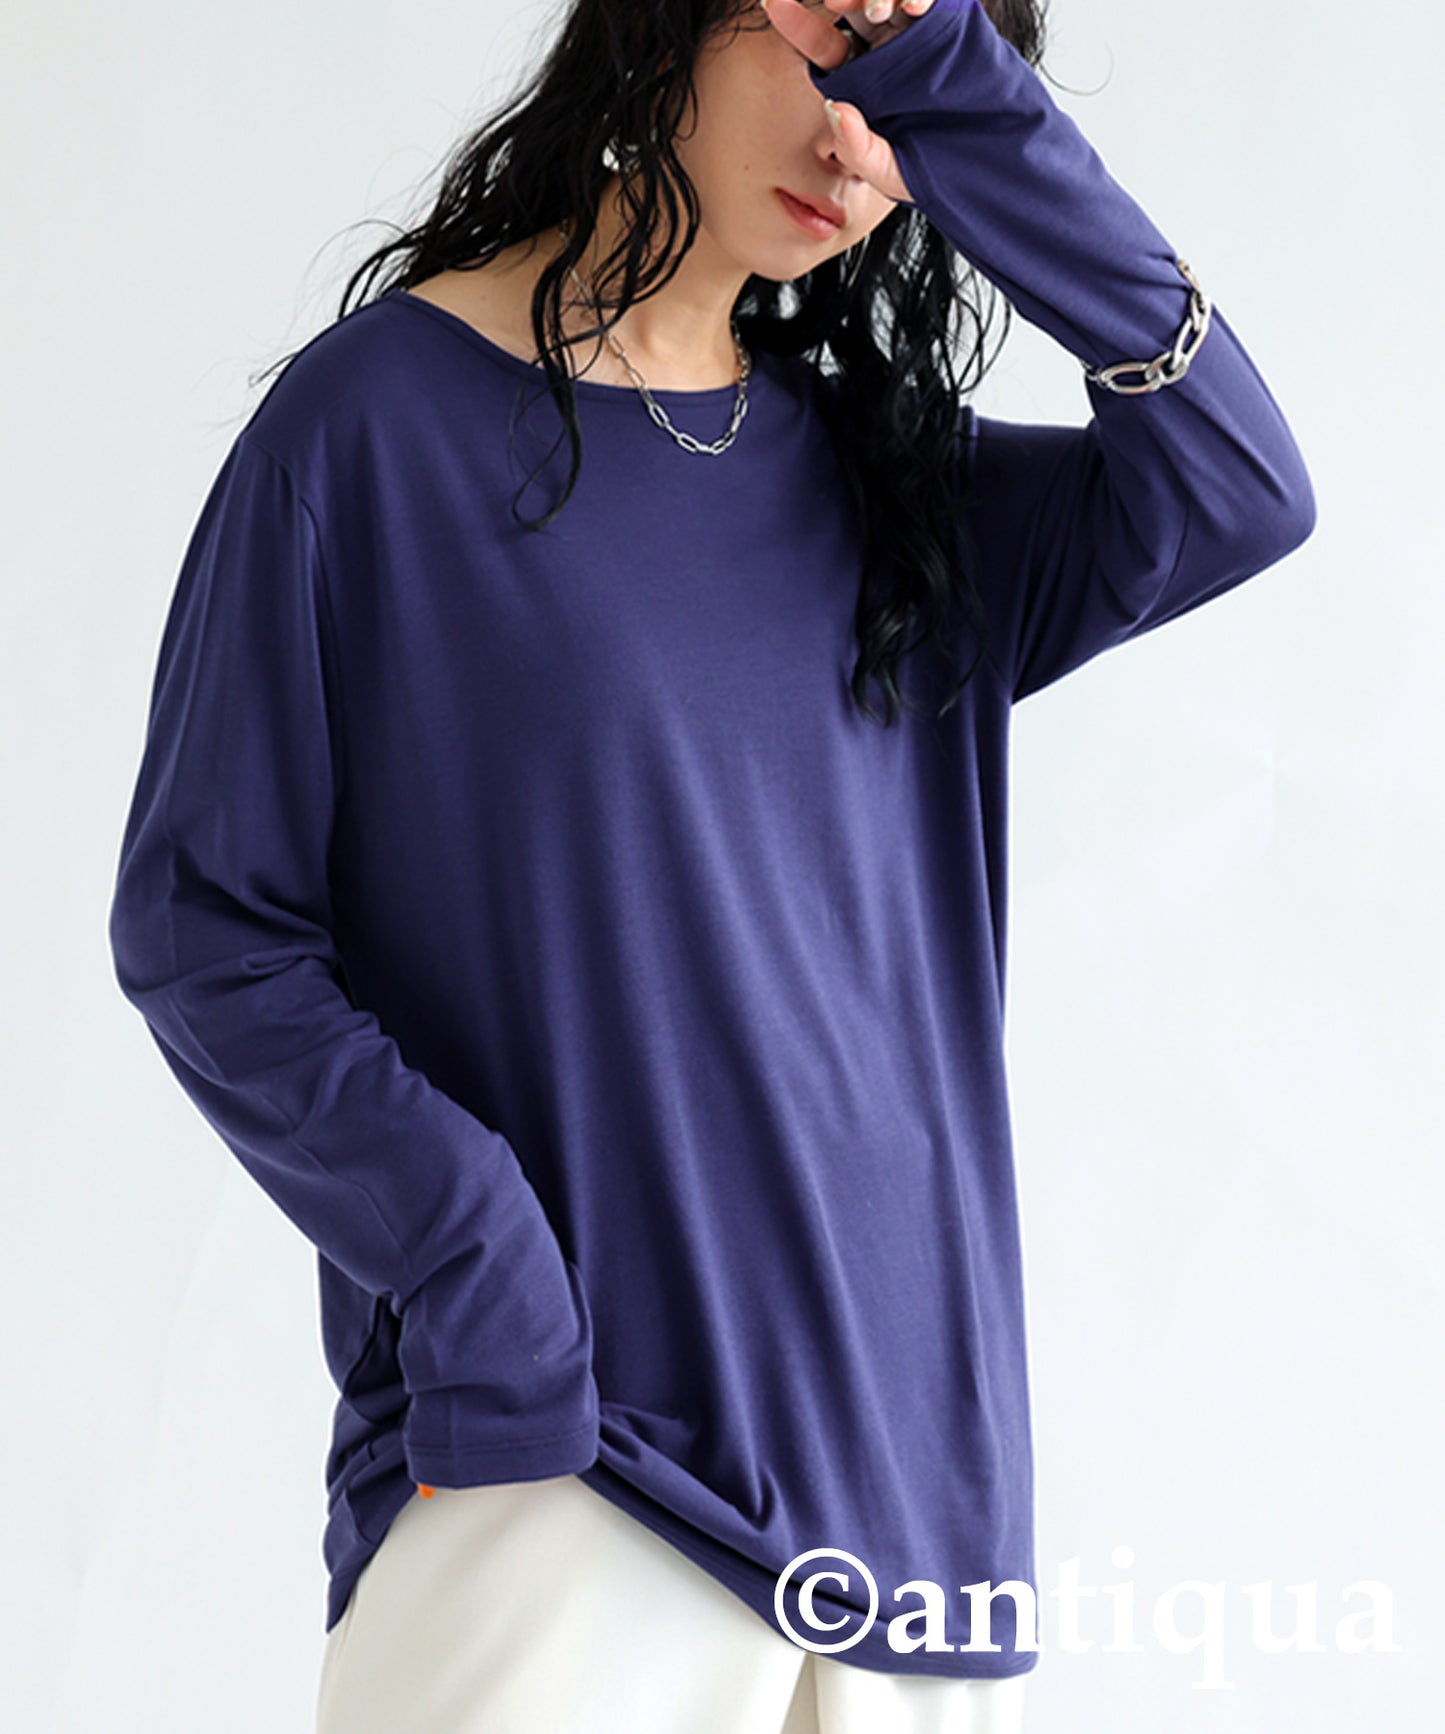 Cool touch UV Cut Ladies tops Tops in rib with thumb hole